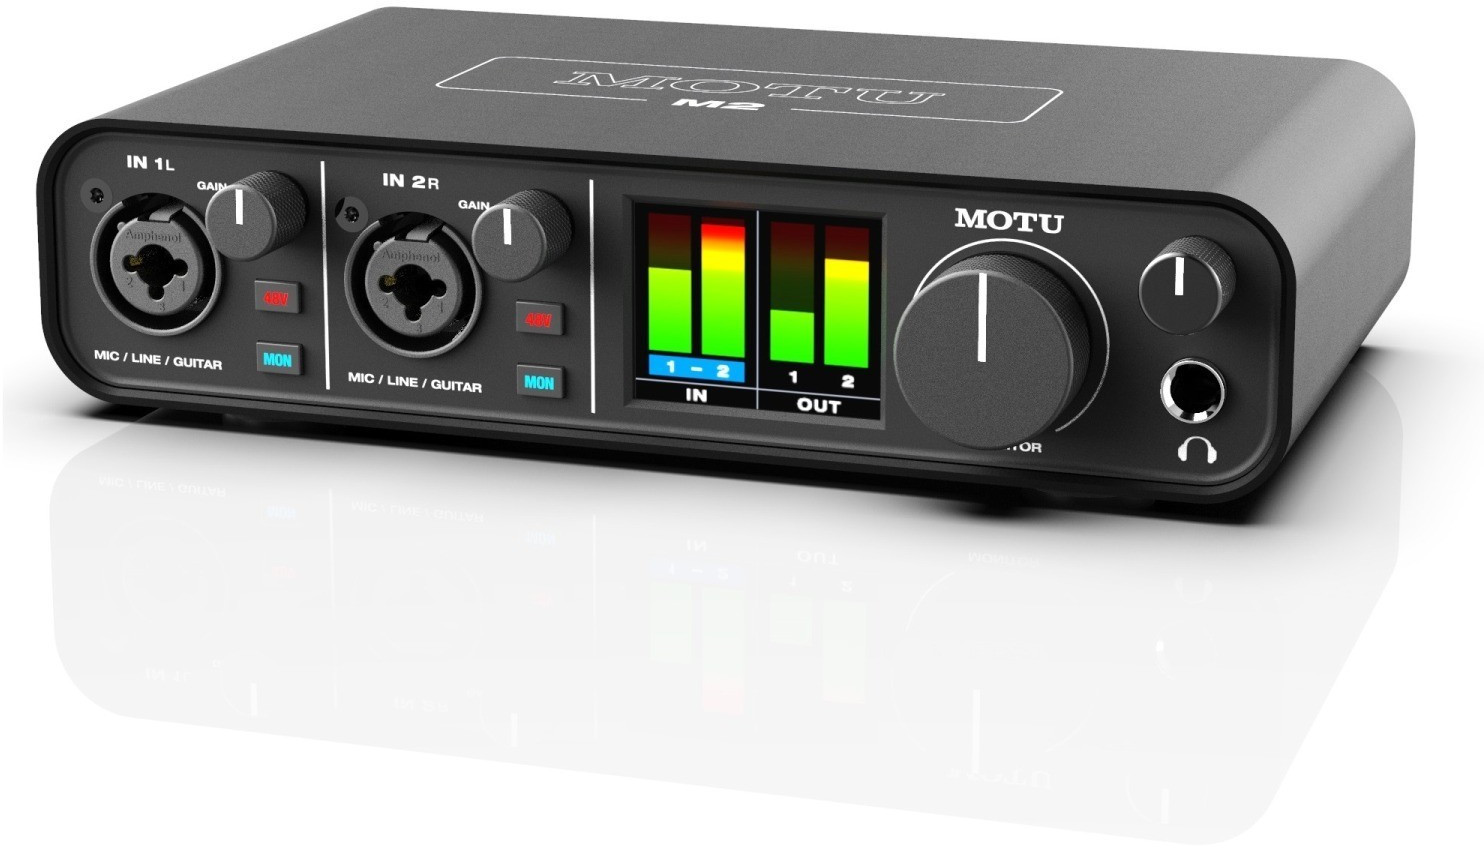 Buy MOTU M2 from £181.39 (Today) – January sales on idealo.co.uk